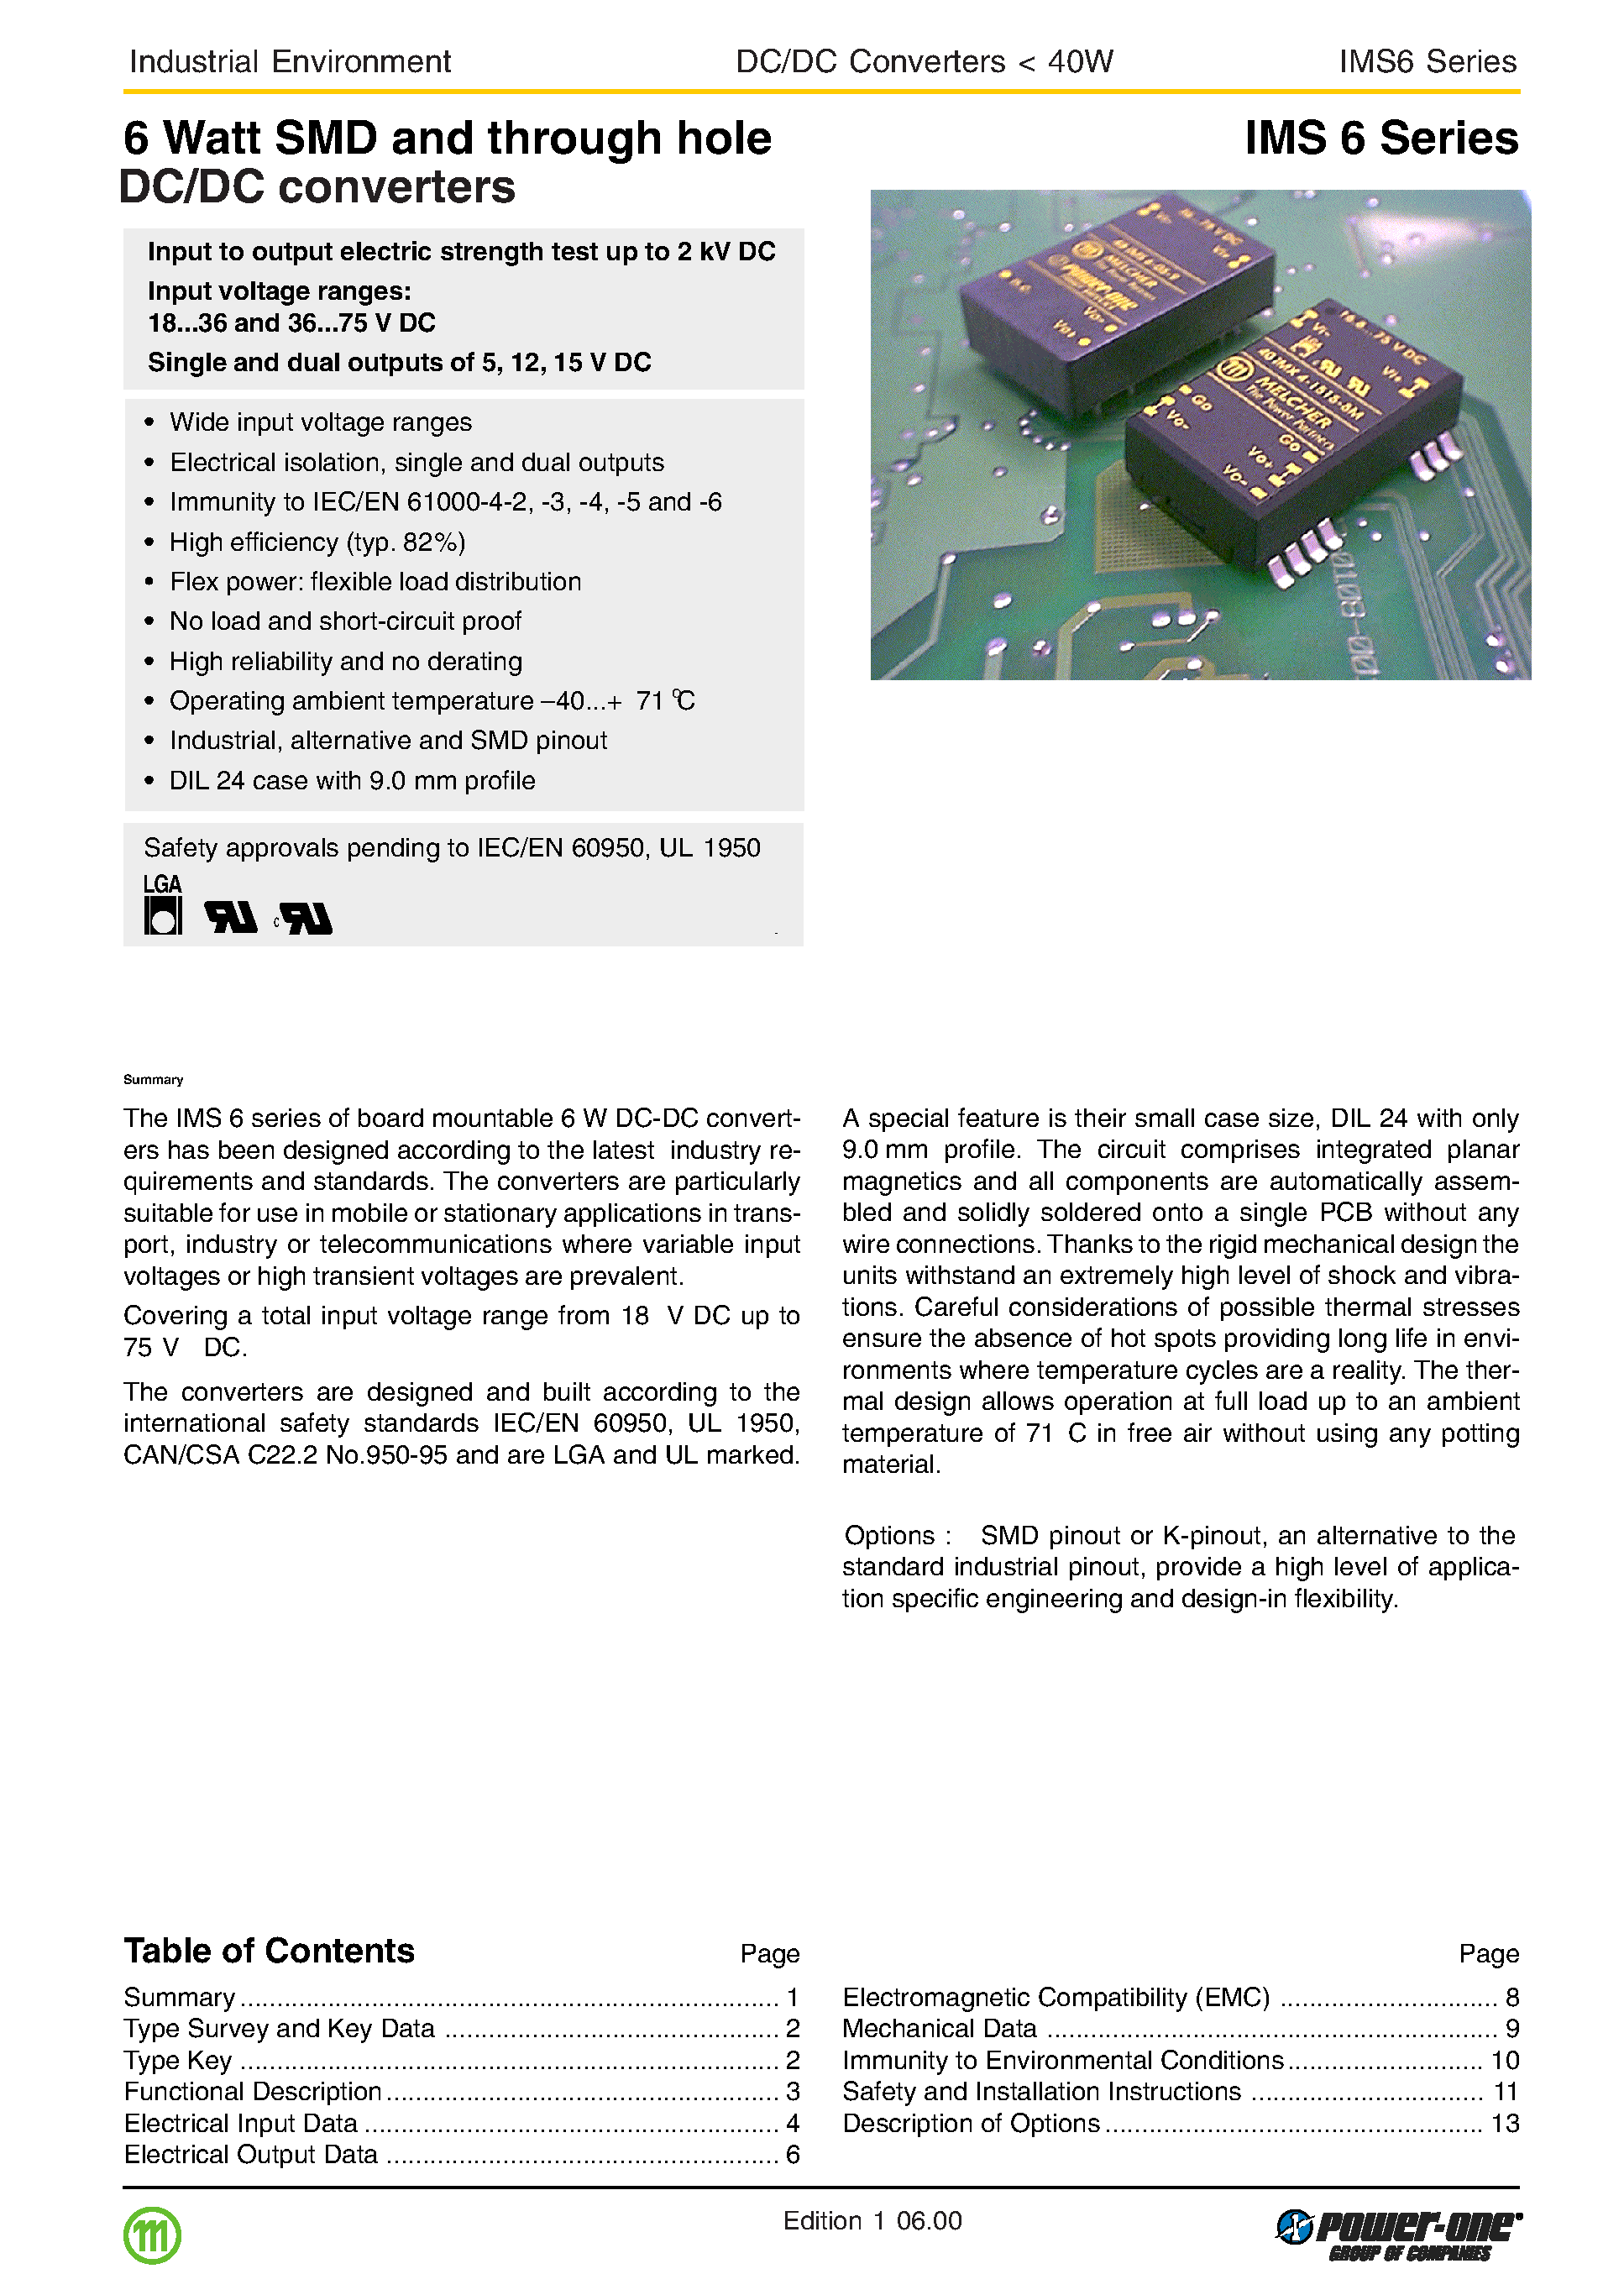 Datasheet 48IMS6-0505-9 - 6 Watt SMD and through hole DC/DC converters page 1